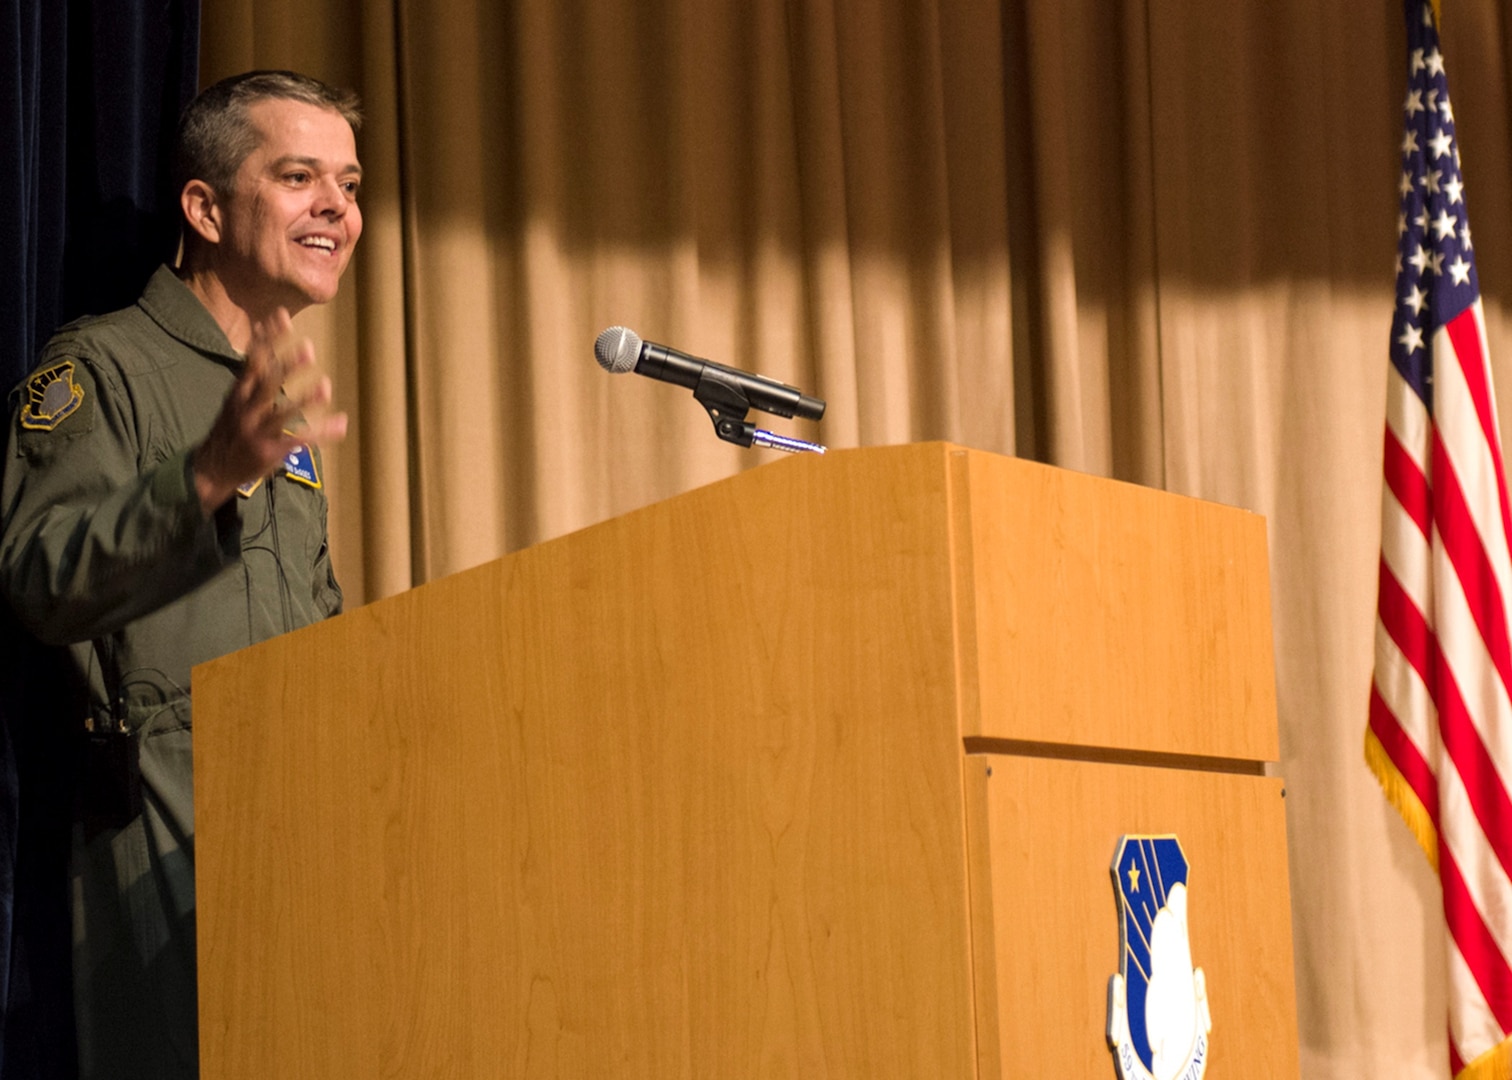 Maj. Gen. John J. DeGoes, 59th Medical Wing commander, addresses the audience after taking command during the June 14, 2018, ceremony at the old Wilford Hall Ambulatory Surgical Center auditorium at Joint Base San Antonio-Lackland. The 59th MDW provides superior graduate medical education and training, state-of-the-art research, and first-class global medical readiness. It also serves as the Air Force functional medical command for Joint Base San Antonio.